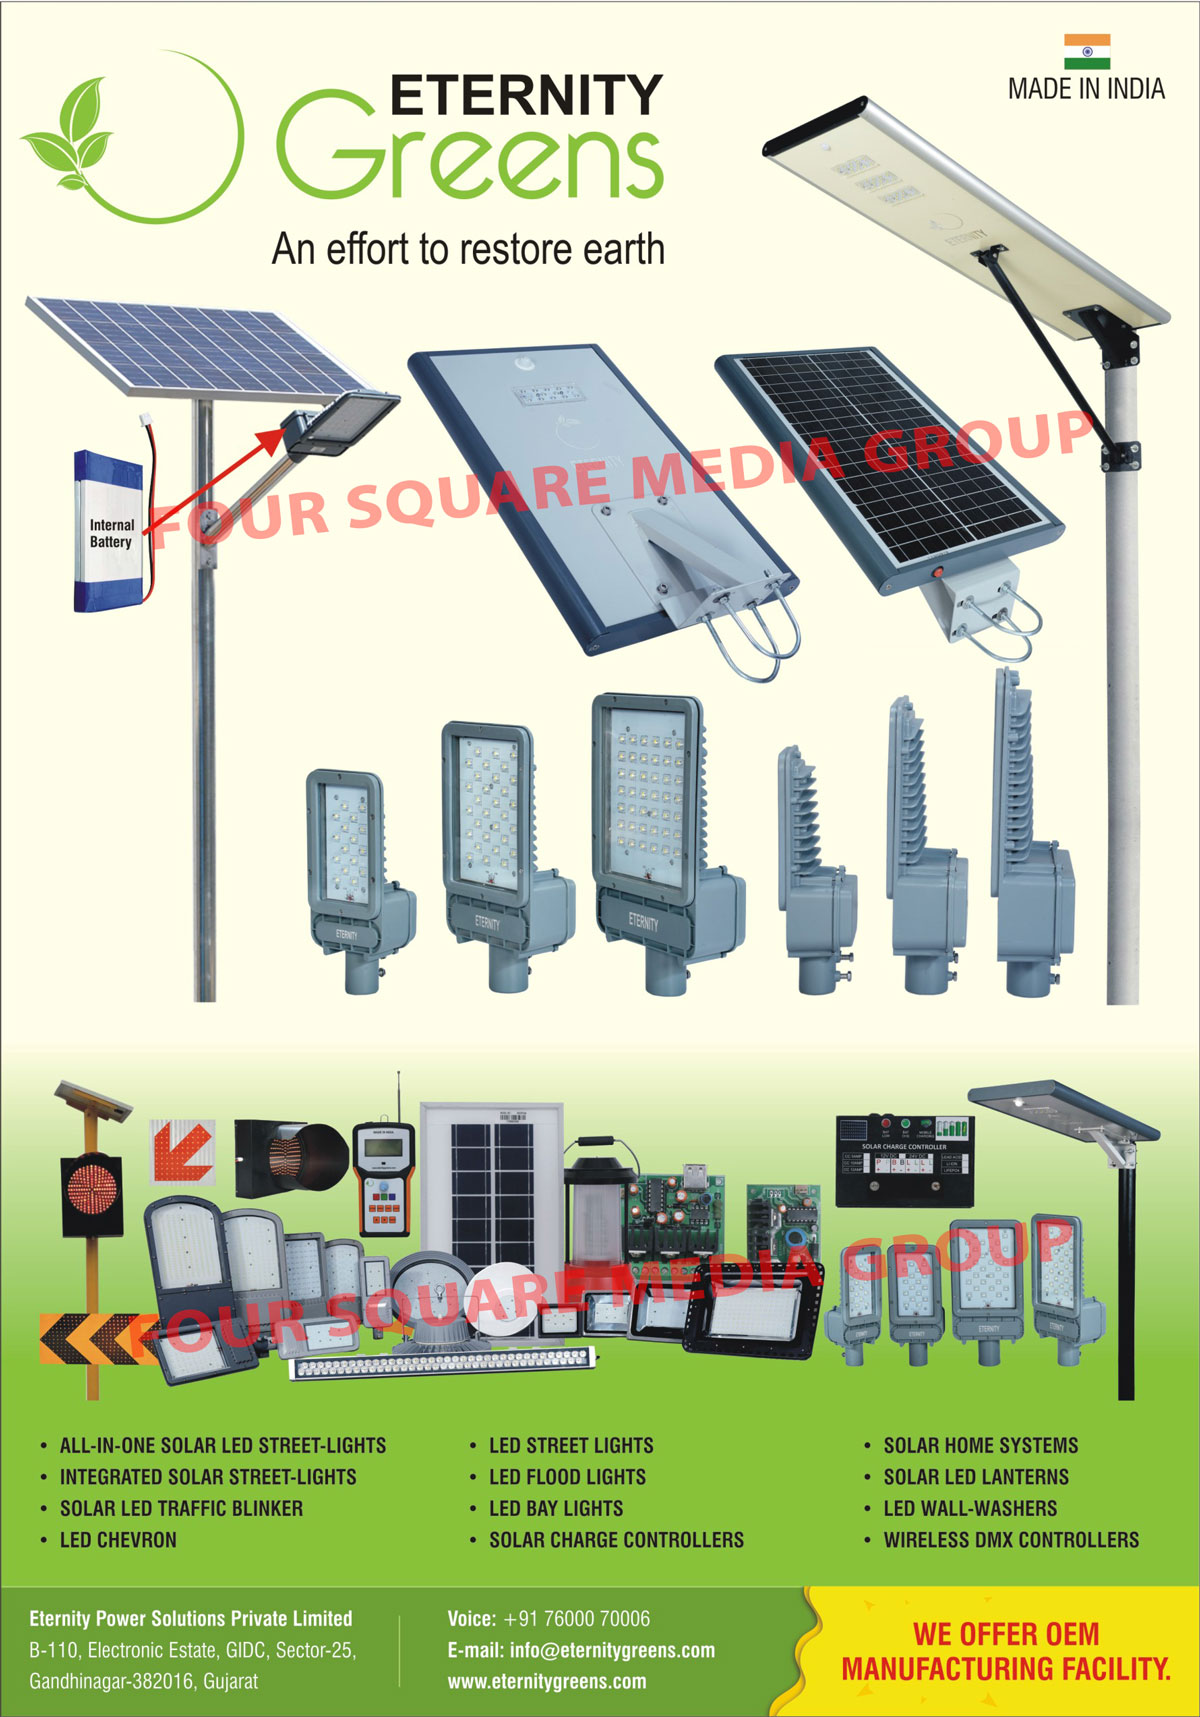 Led Lights, Solar Led Street Lights, Integrated Solar Street Lights, Solar Led Traffic Blinkers, Led Chevron, Led Street Lights, Led Flood Lights, Led Bay Lights, Solar Charge Controllers, Solar Home Systems, Solar Led Lanterns, Led Wall Washers, Wireless DMX Controllers